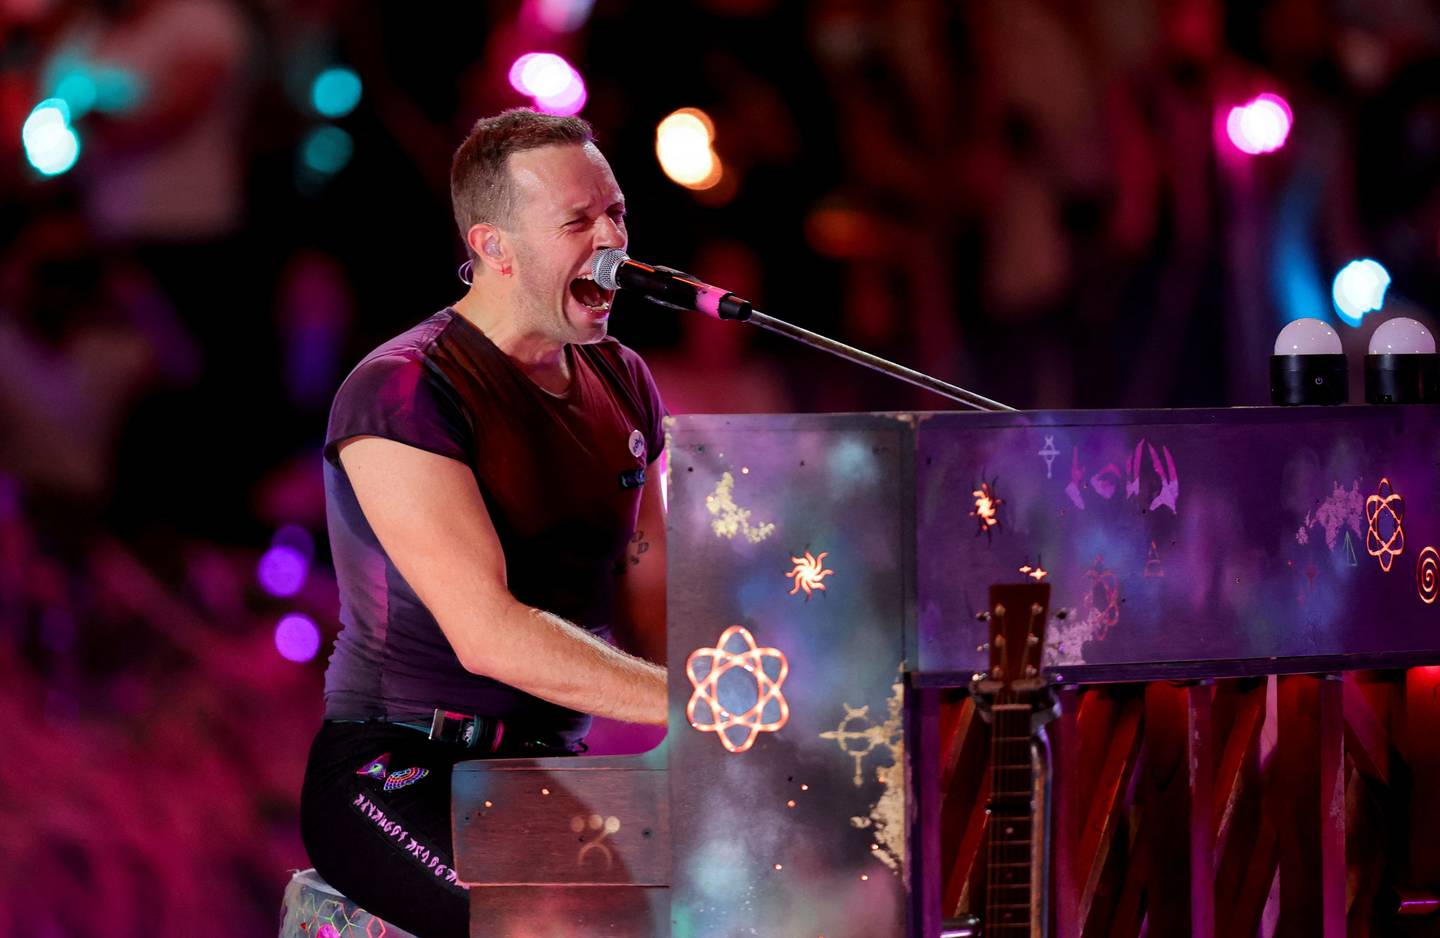 Coldplay's Chris Martin visited the studio while in the emirate for a performance at Expo 2020 Dubai. Photo: Reuters

